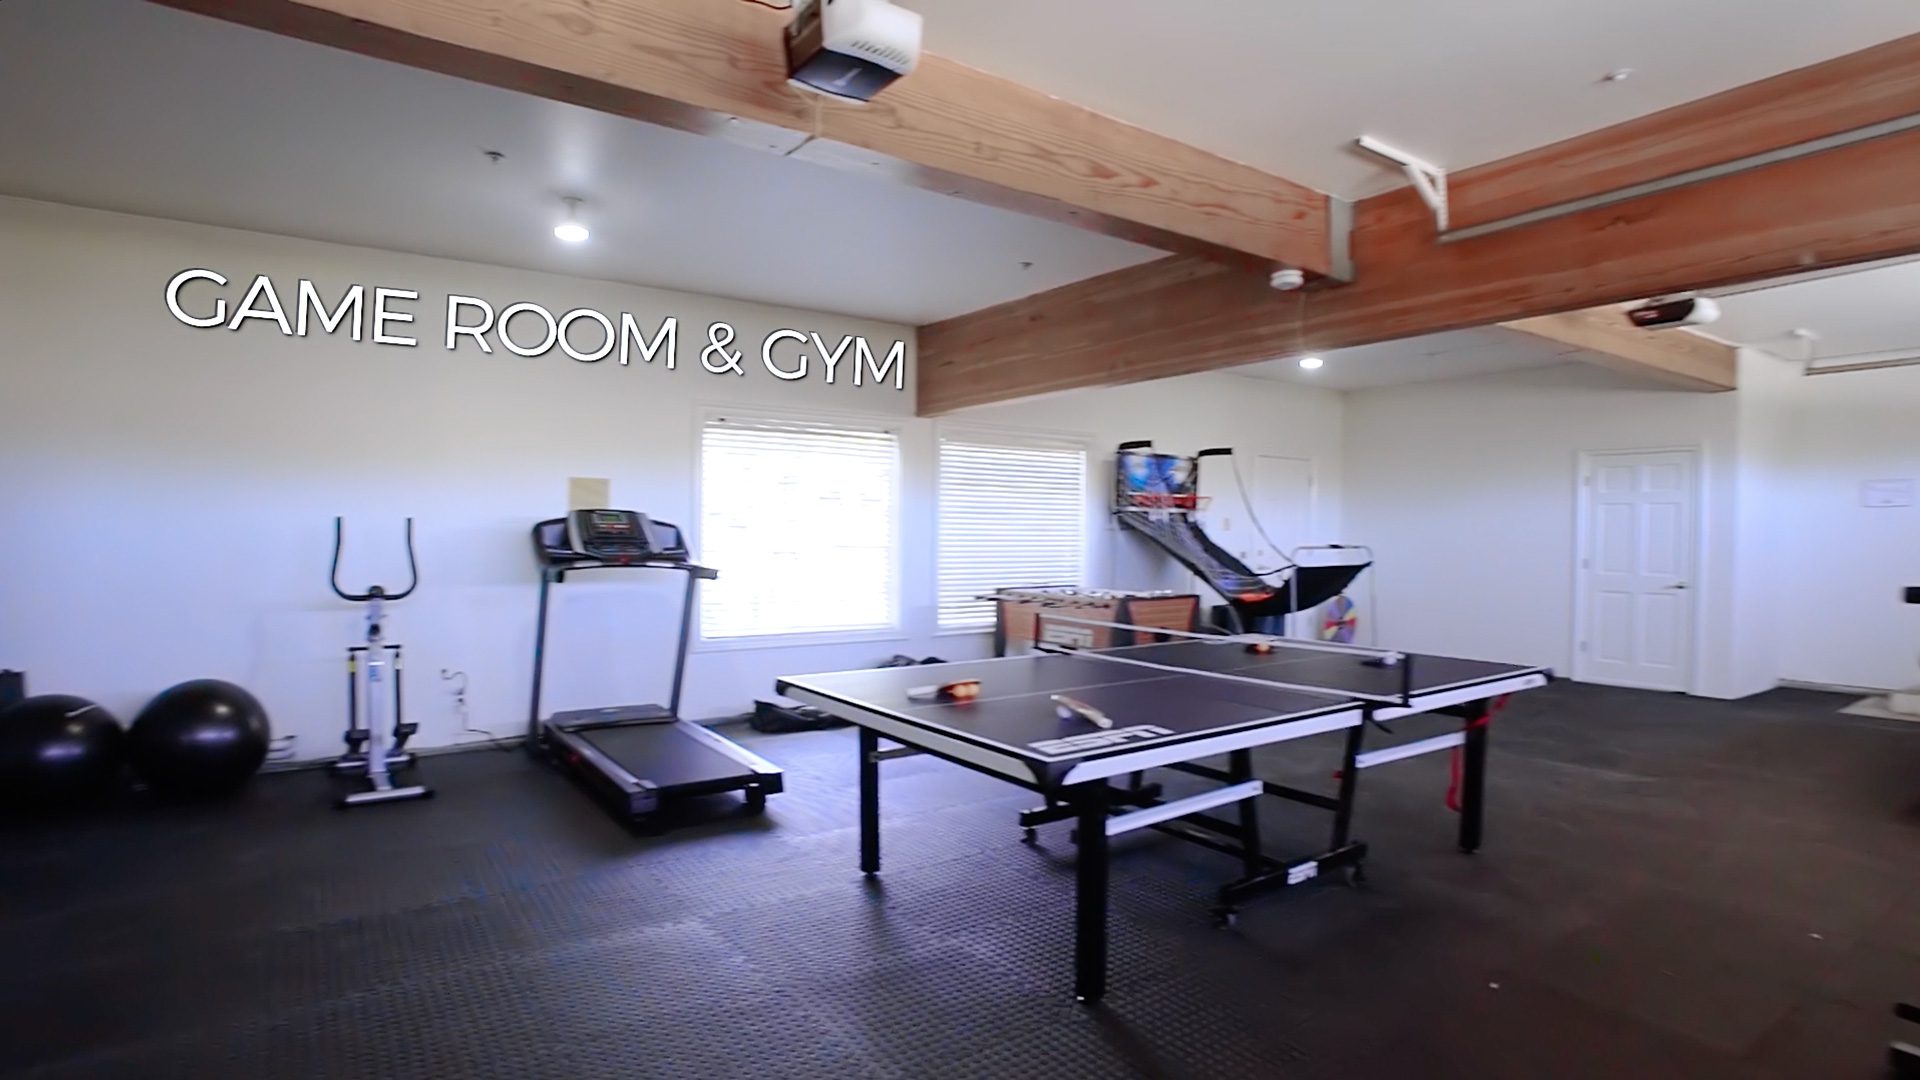 valley recovery center agua dulce game room gym